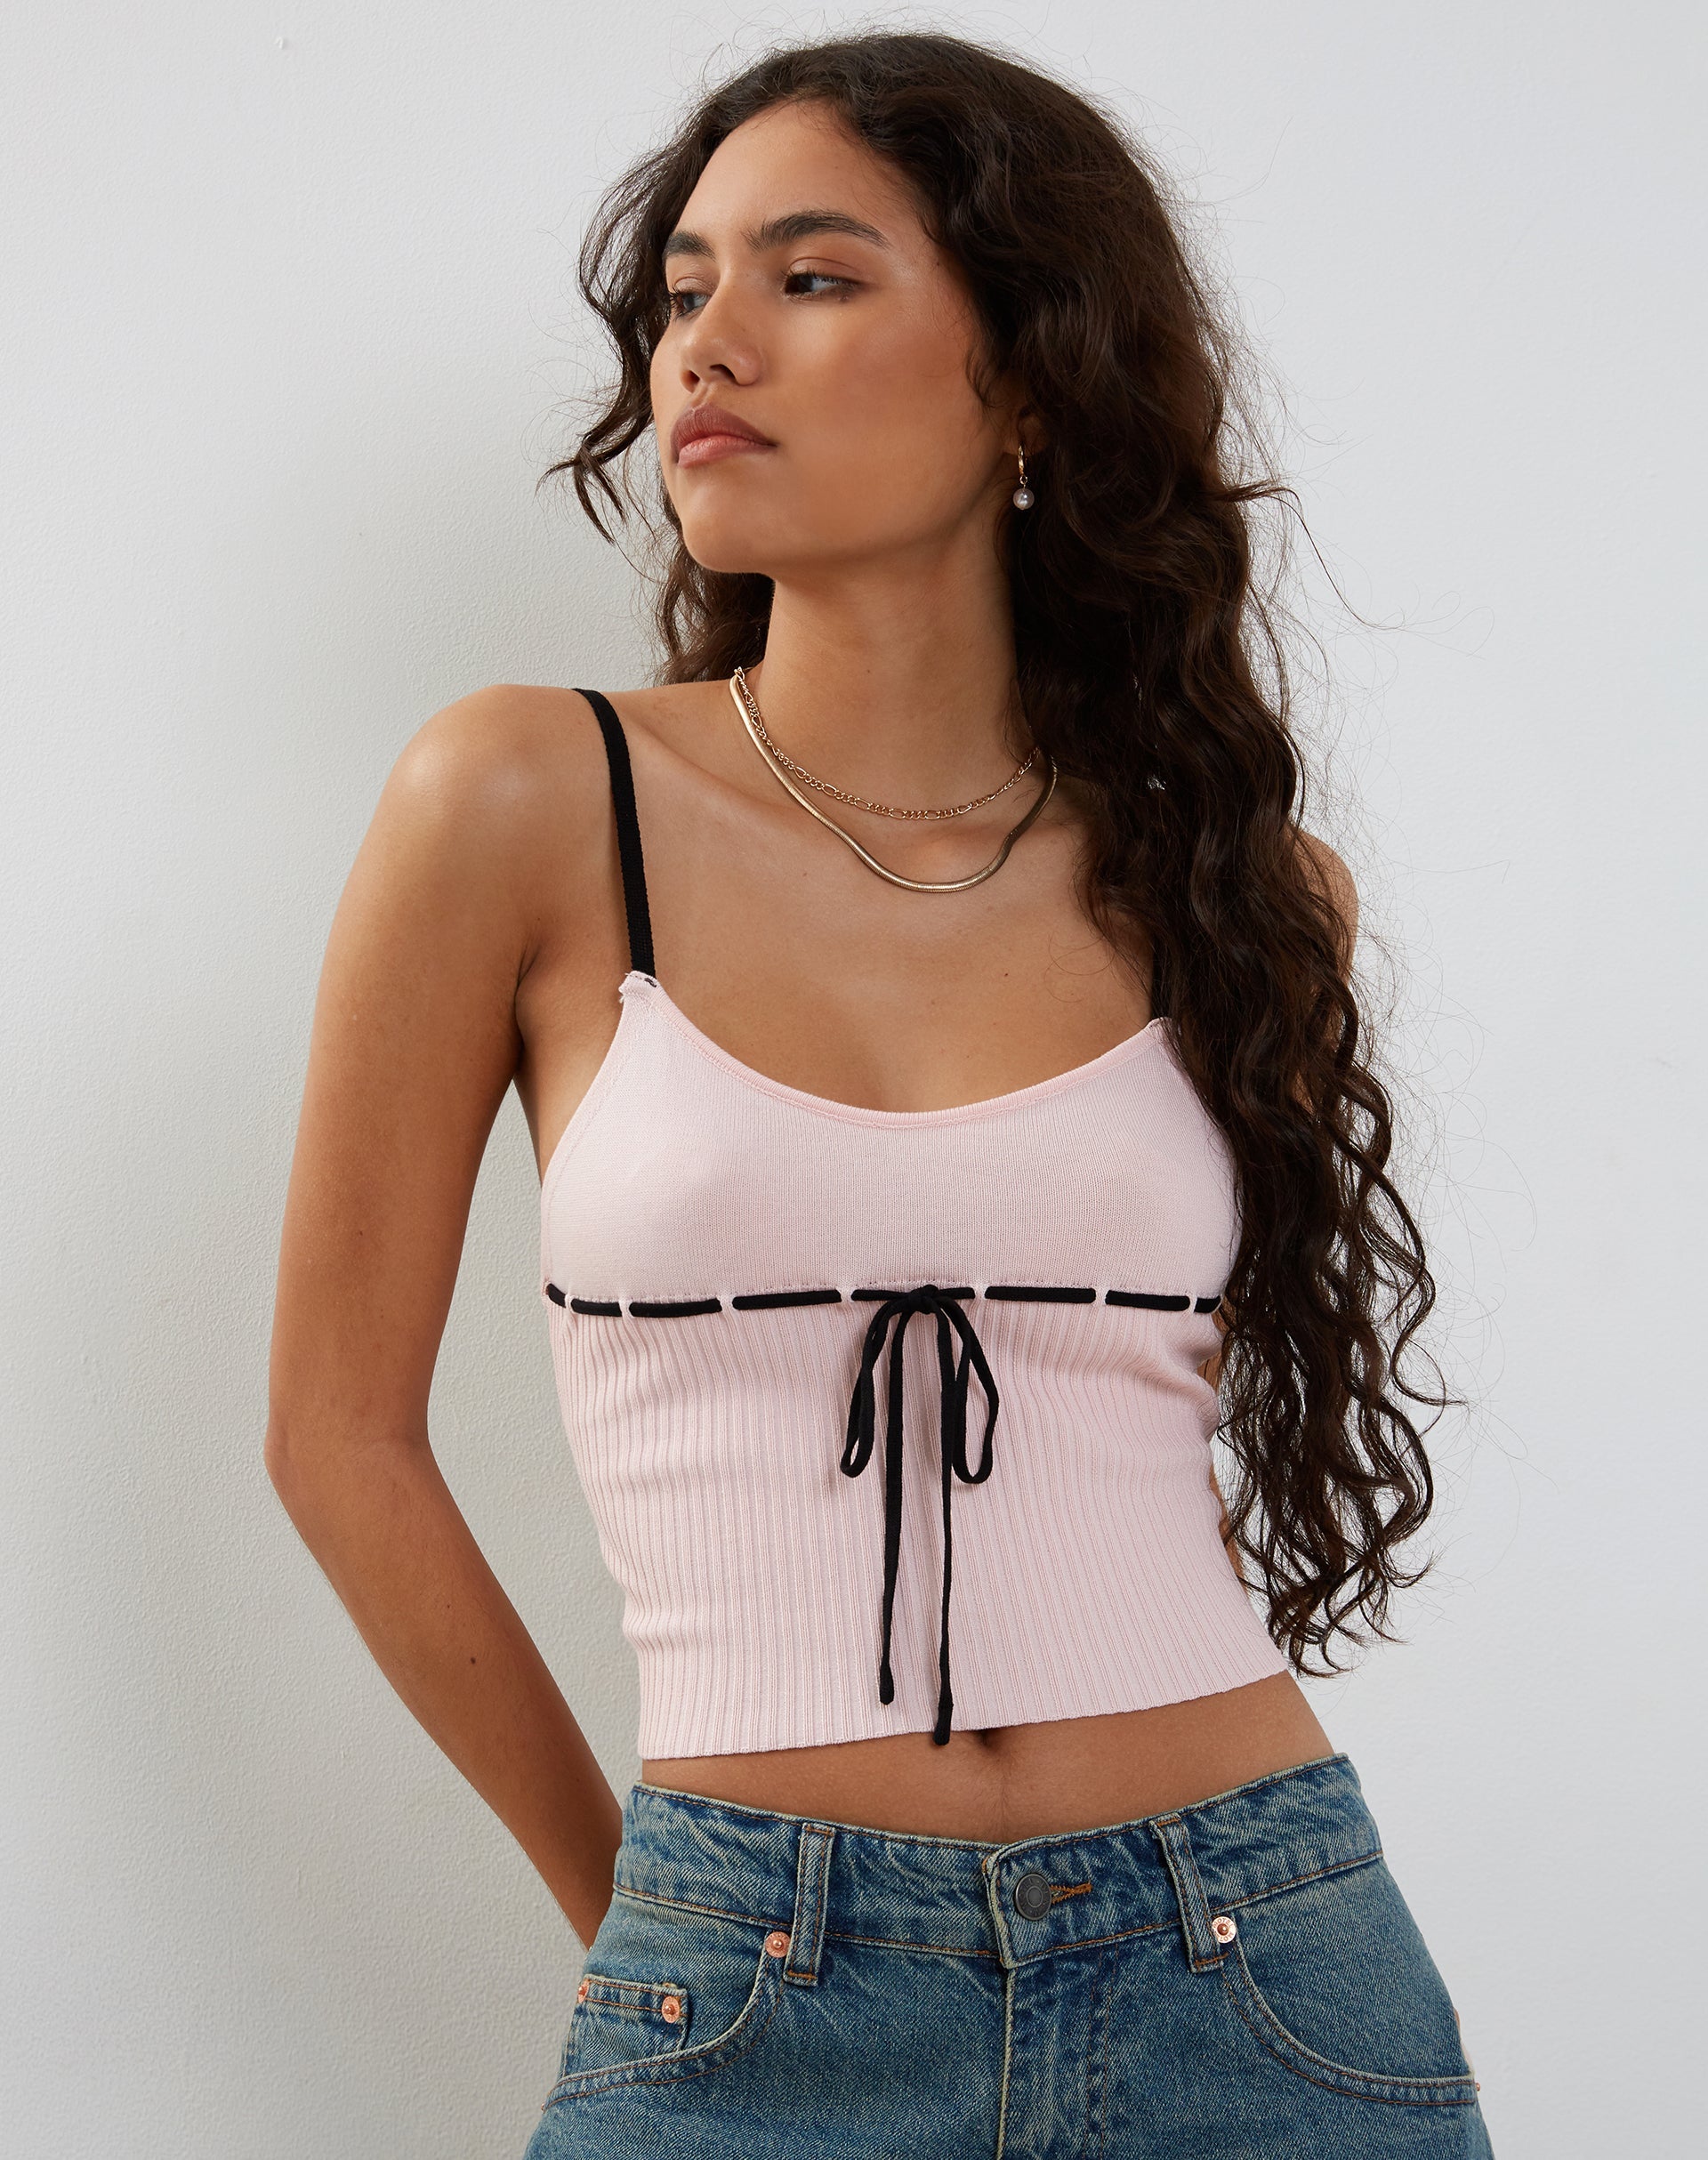 STRAPPY CROP TOP Cute Cami Top For Women Knit Cami Top Ruffle Top